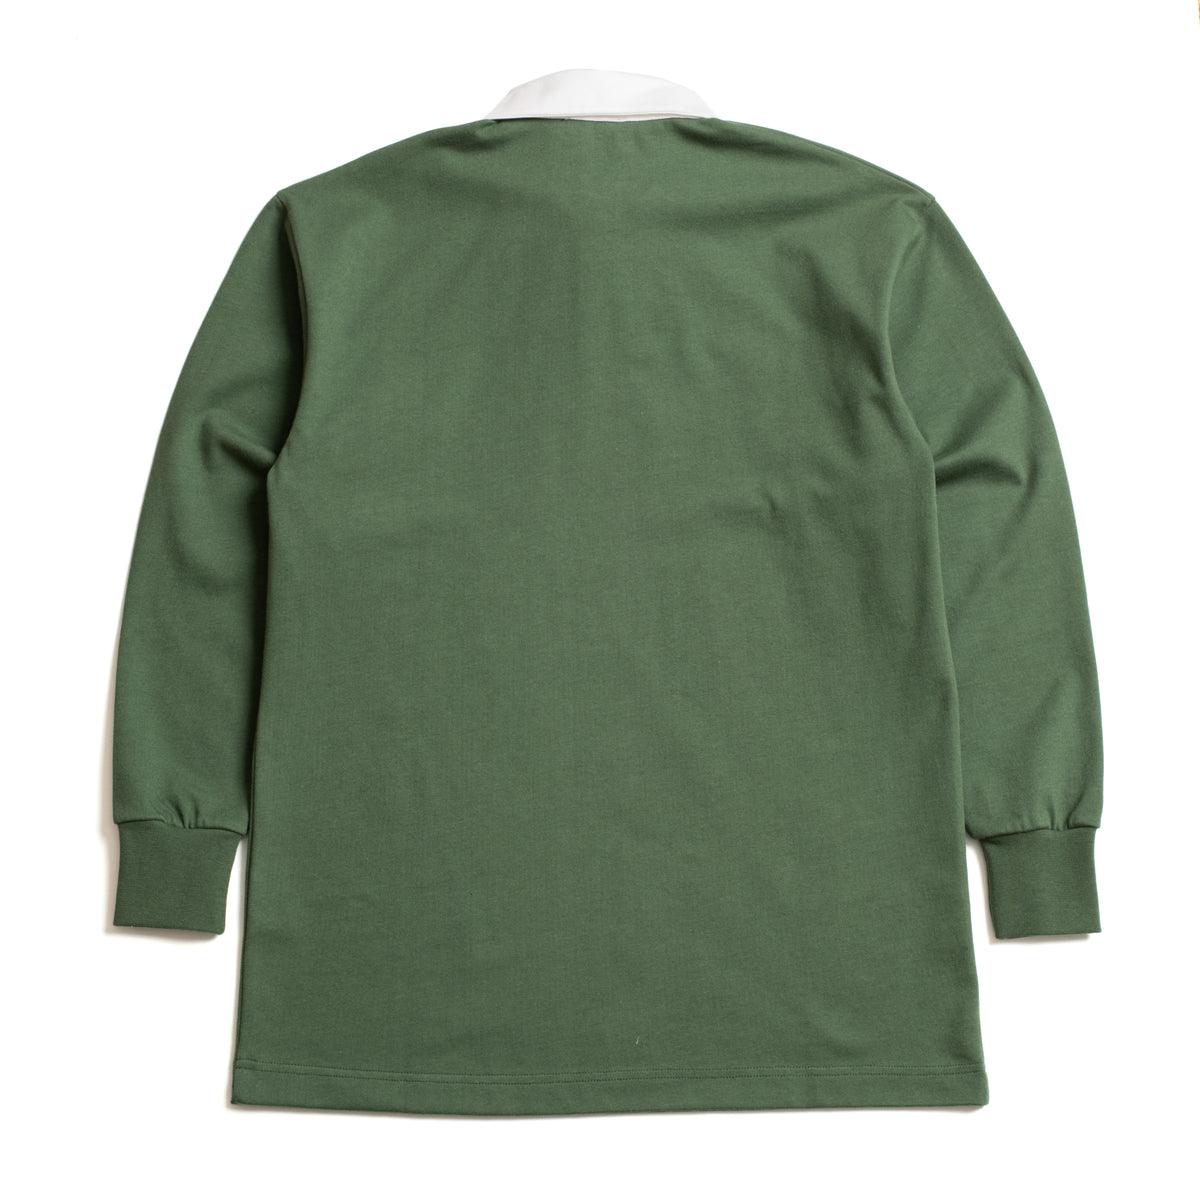 Olive Rugby Shirt